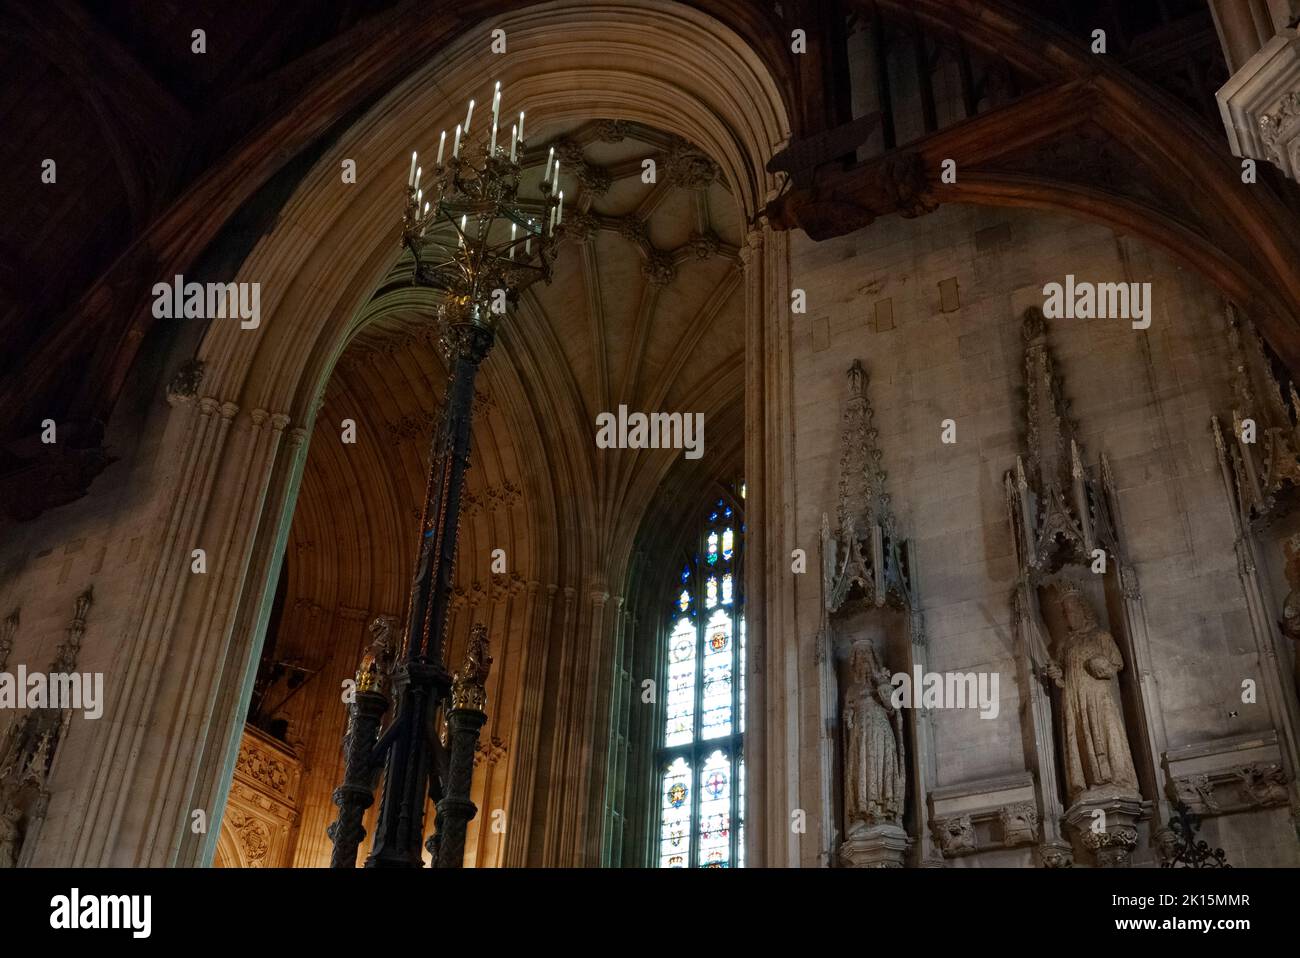 Vaulted ceiling and carved statues at Westminster Hall, Palace of Westminster, London, United Kingdom Stock Photo